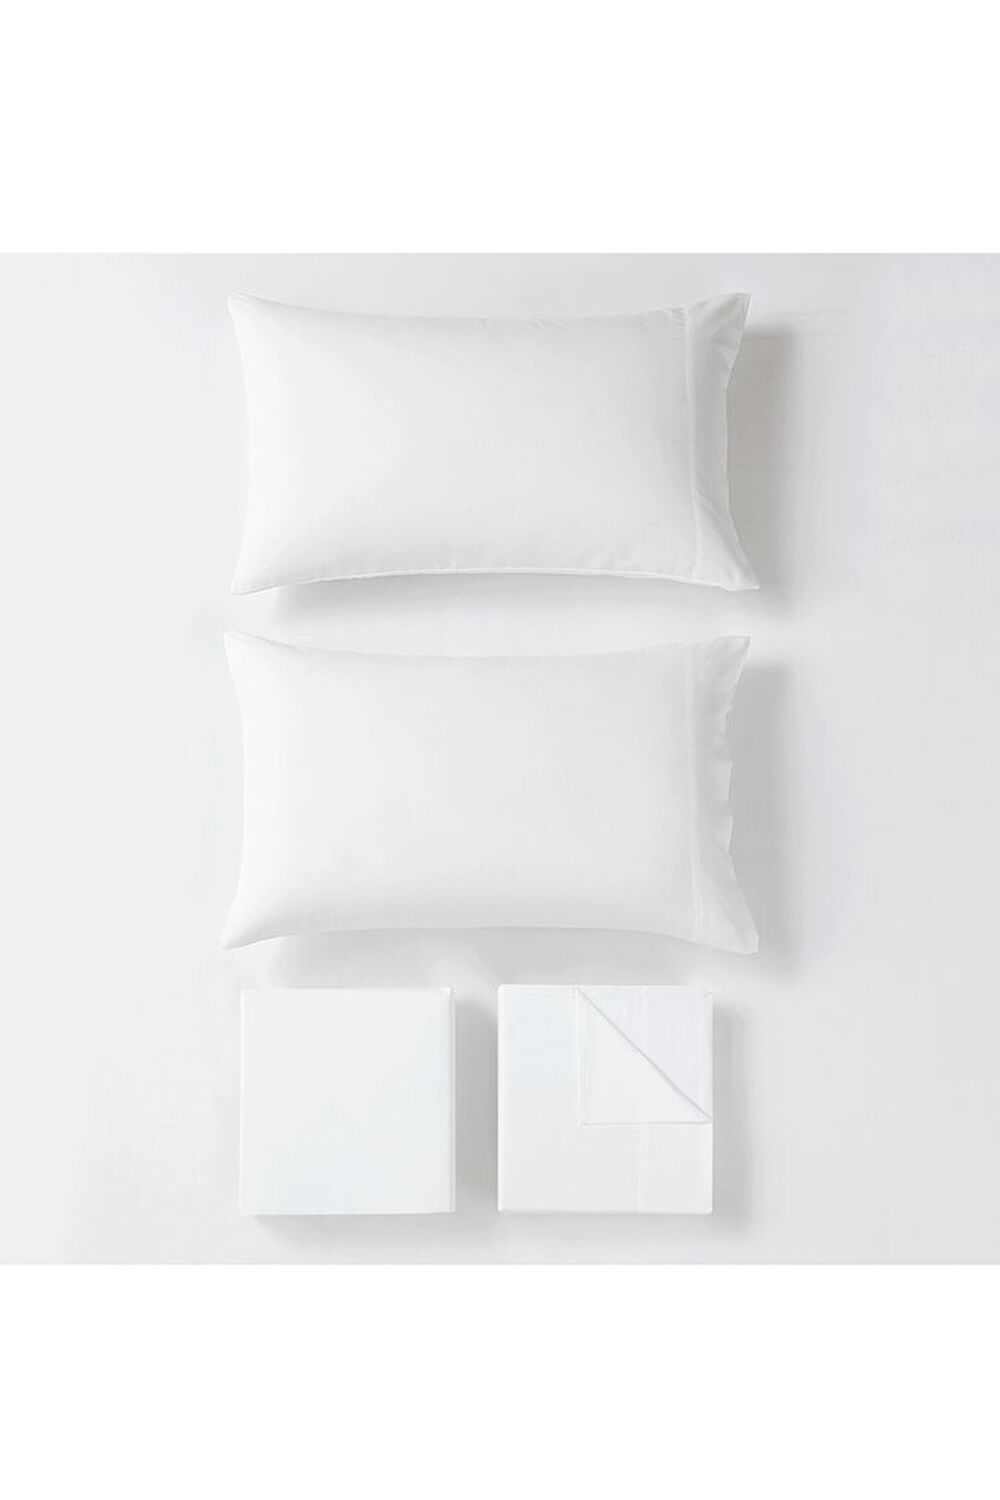 WHITE Queen-Sized Sheet Set, image 2